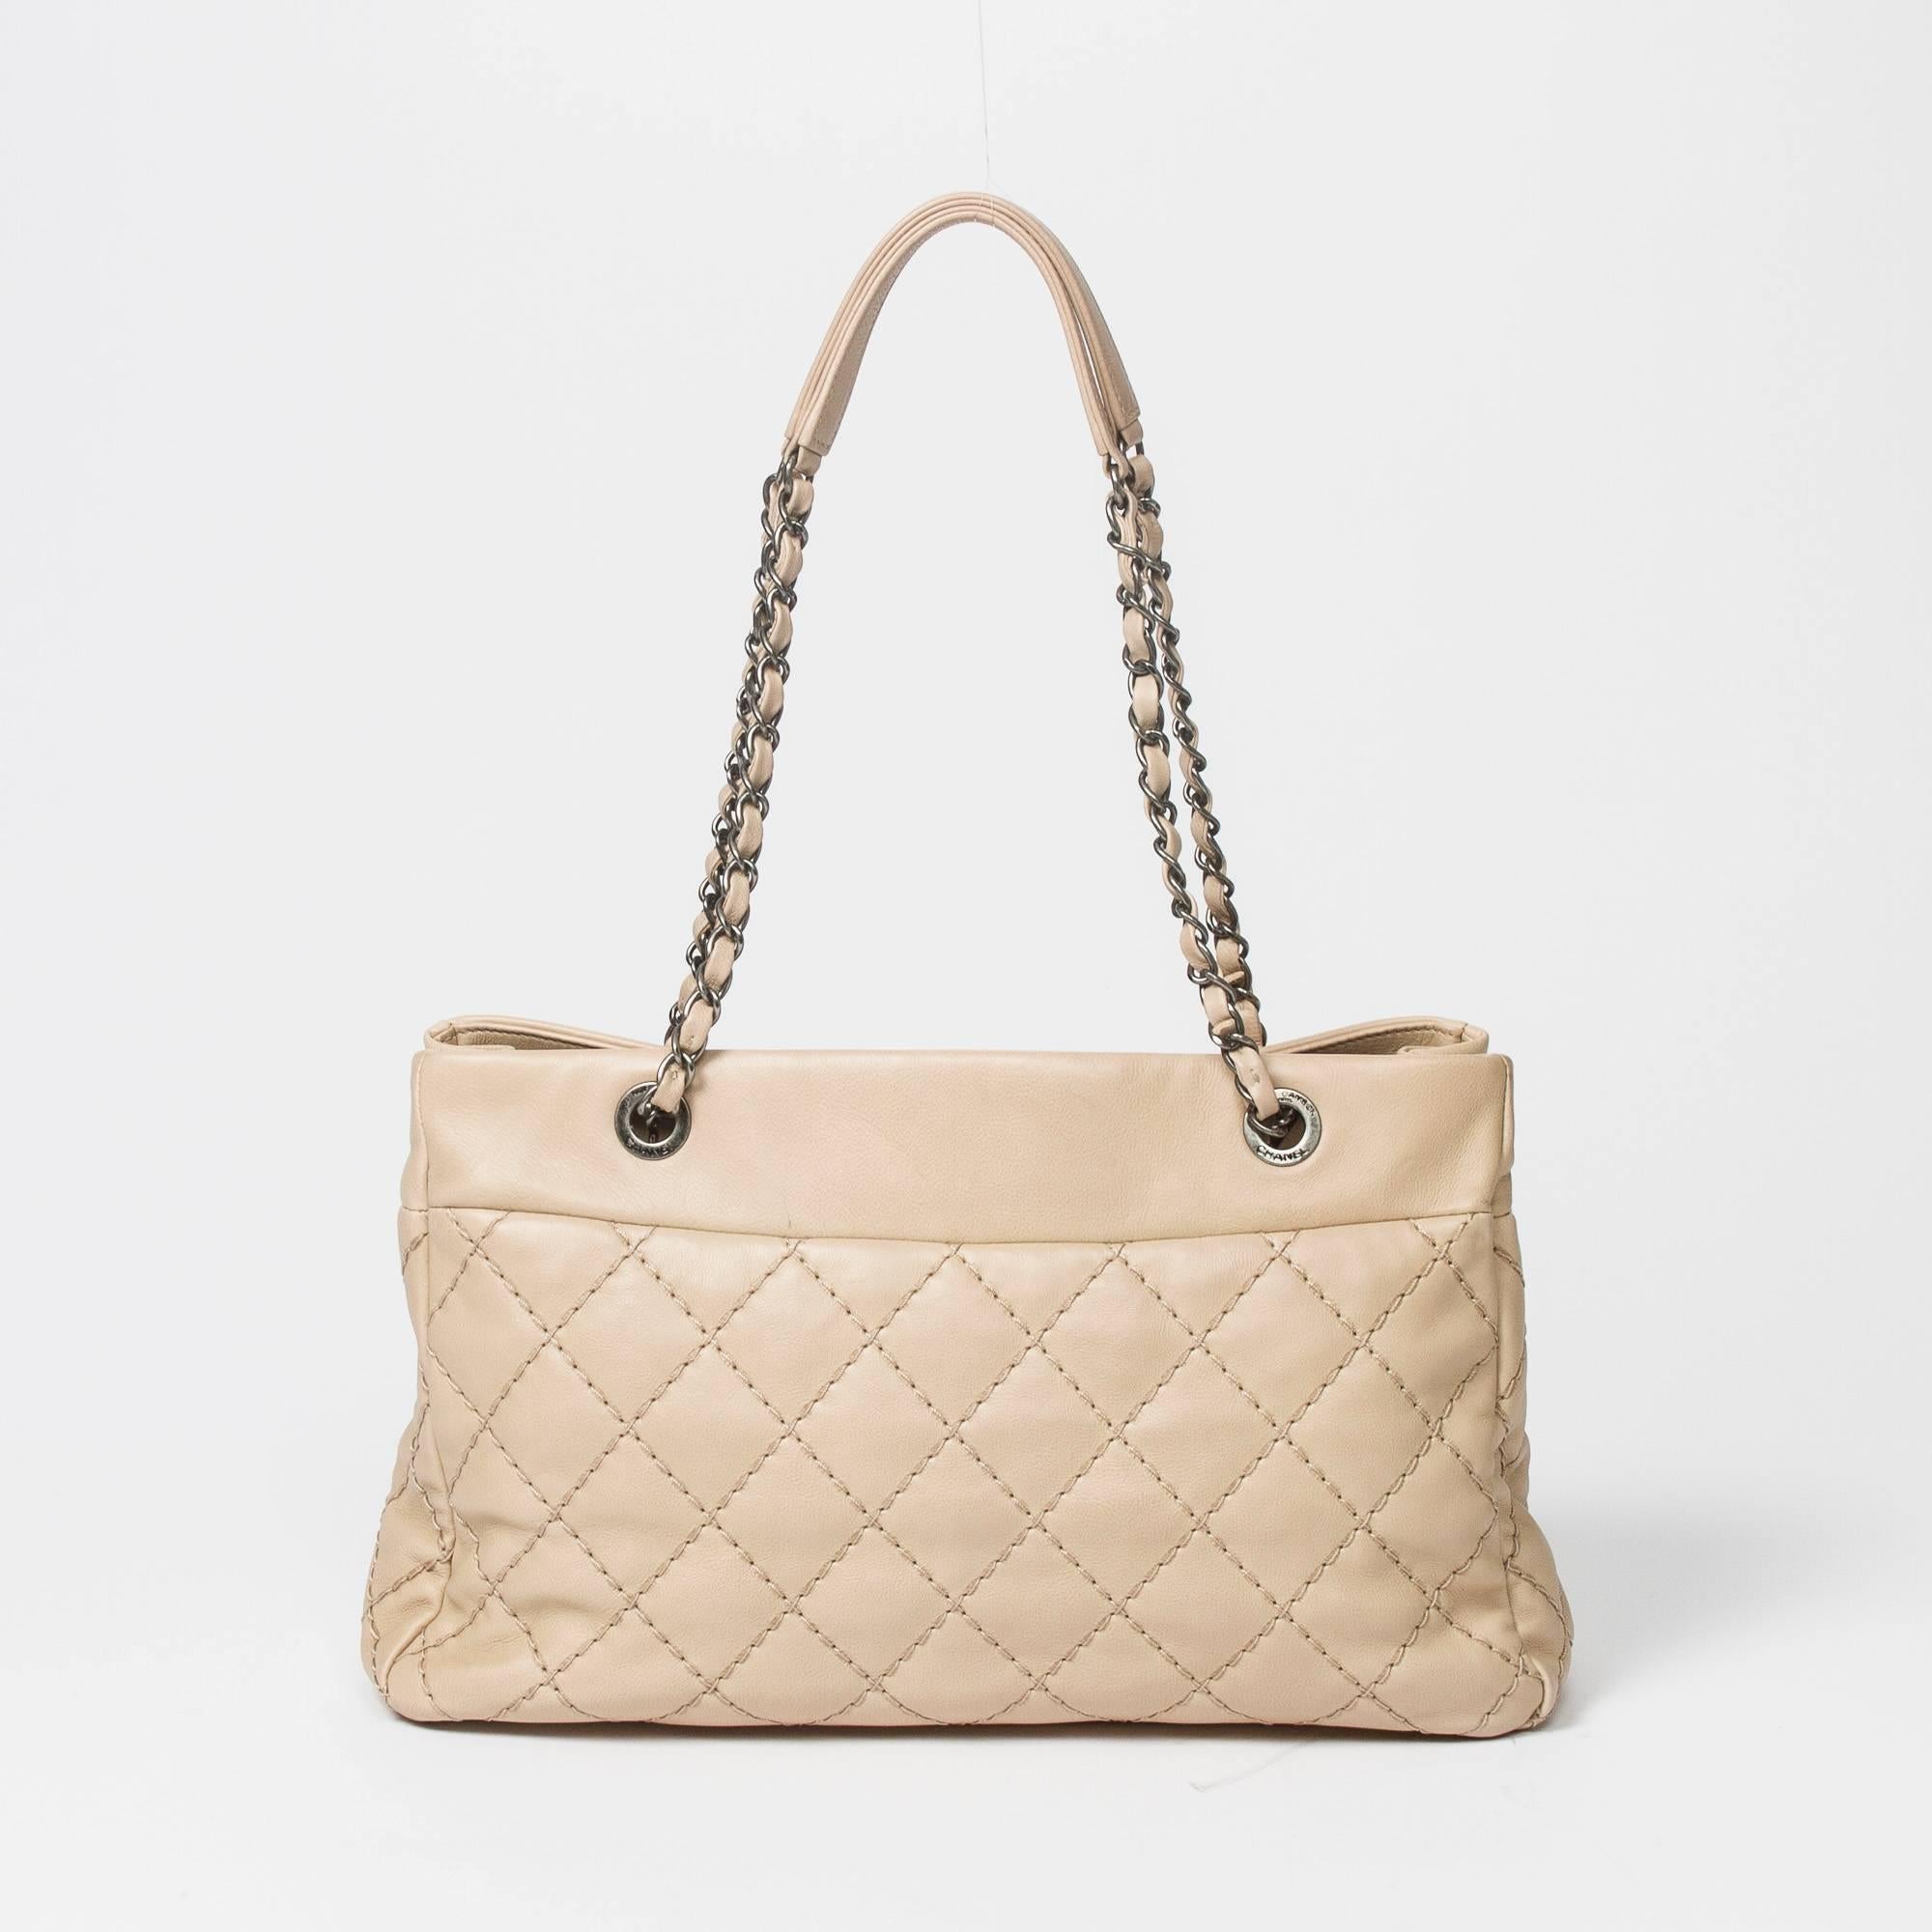 Chanel Tote Beige Stitch Quilted Leather 1